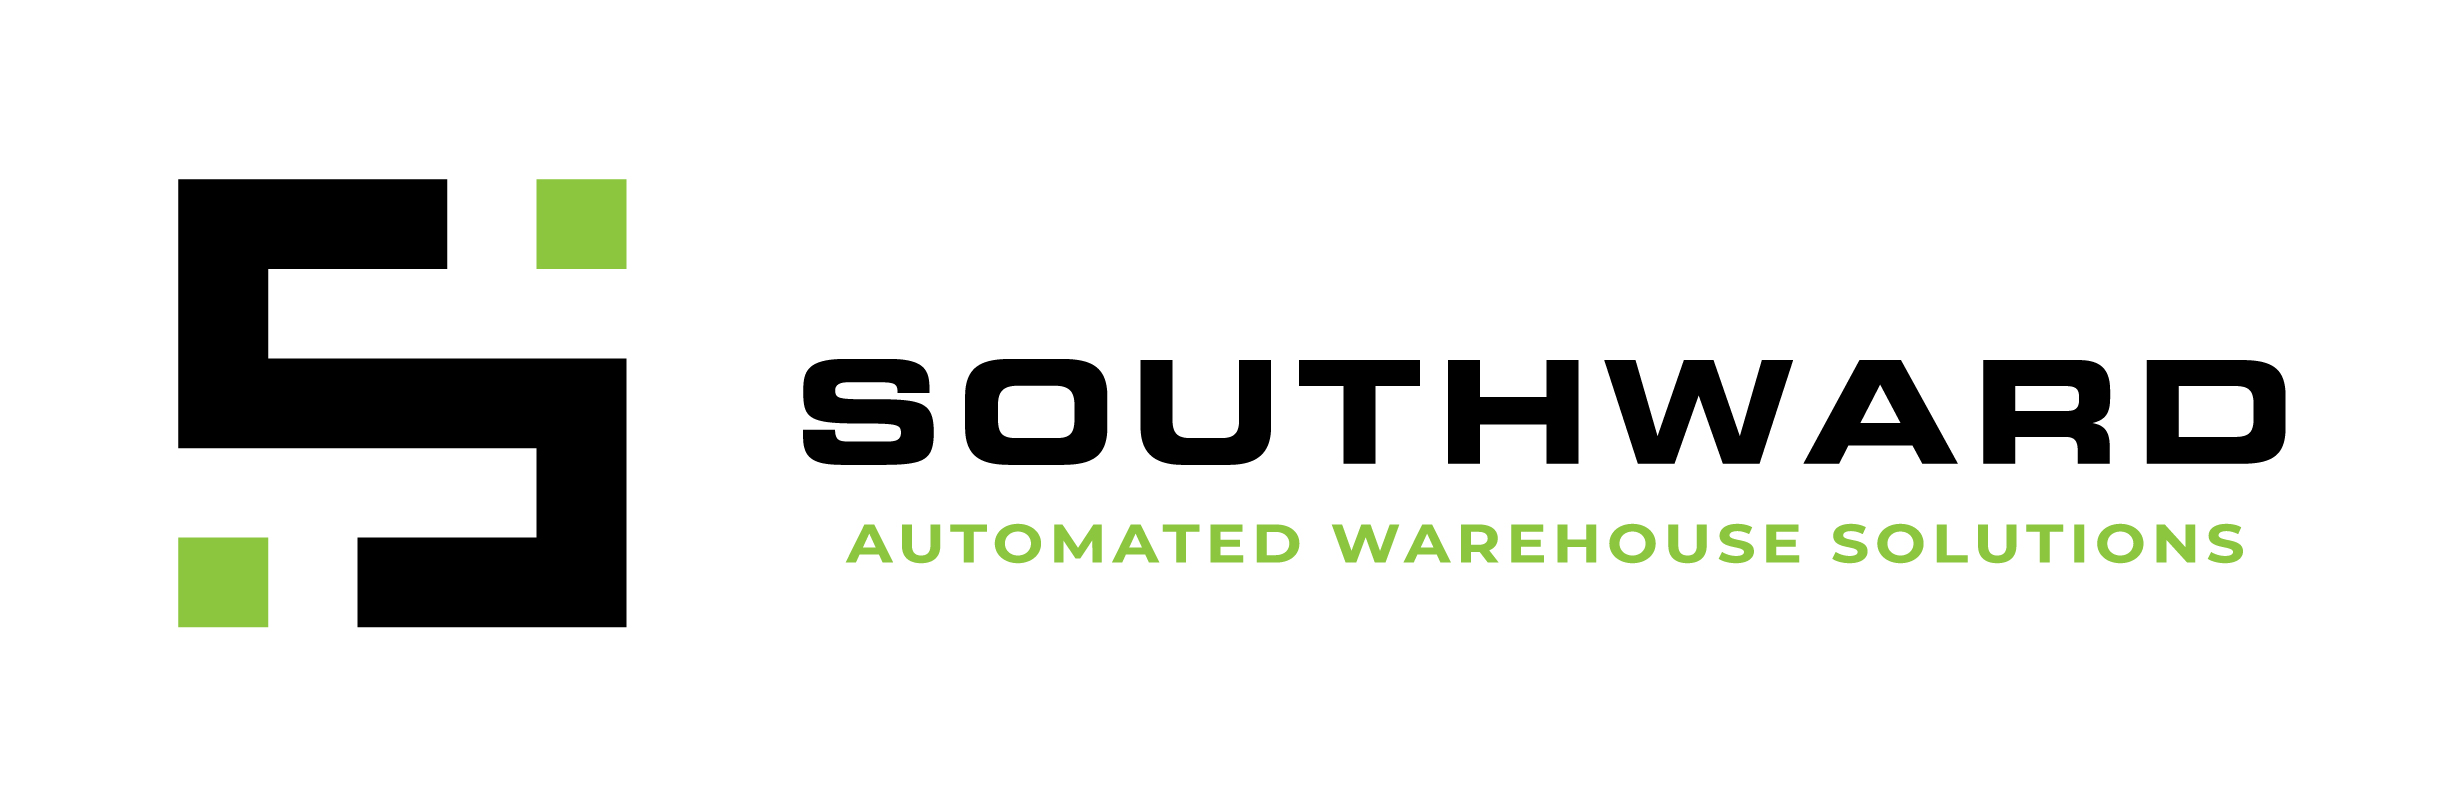 Southward Automated Warehouse Solutions